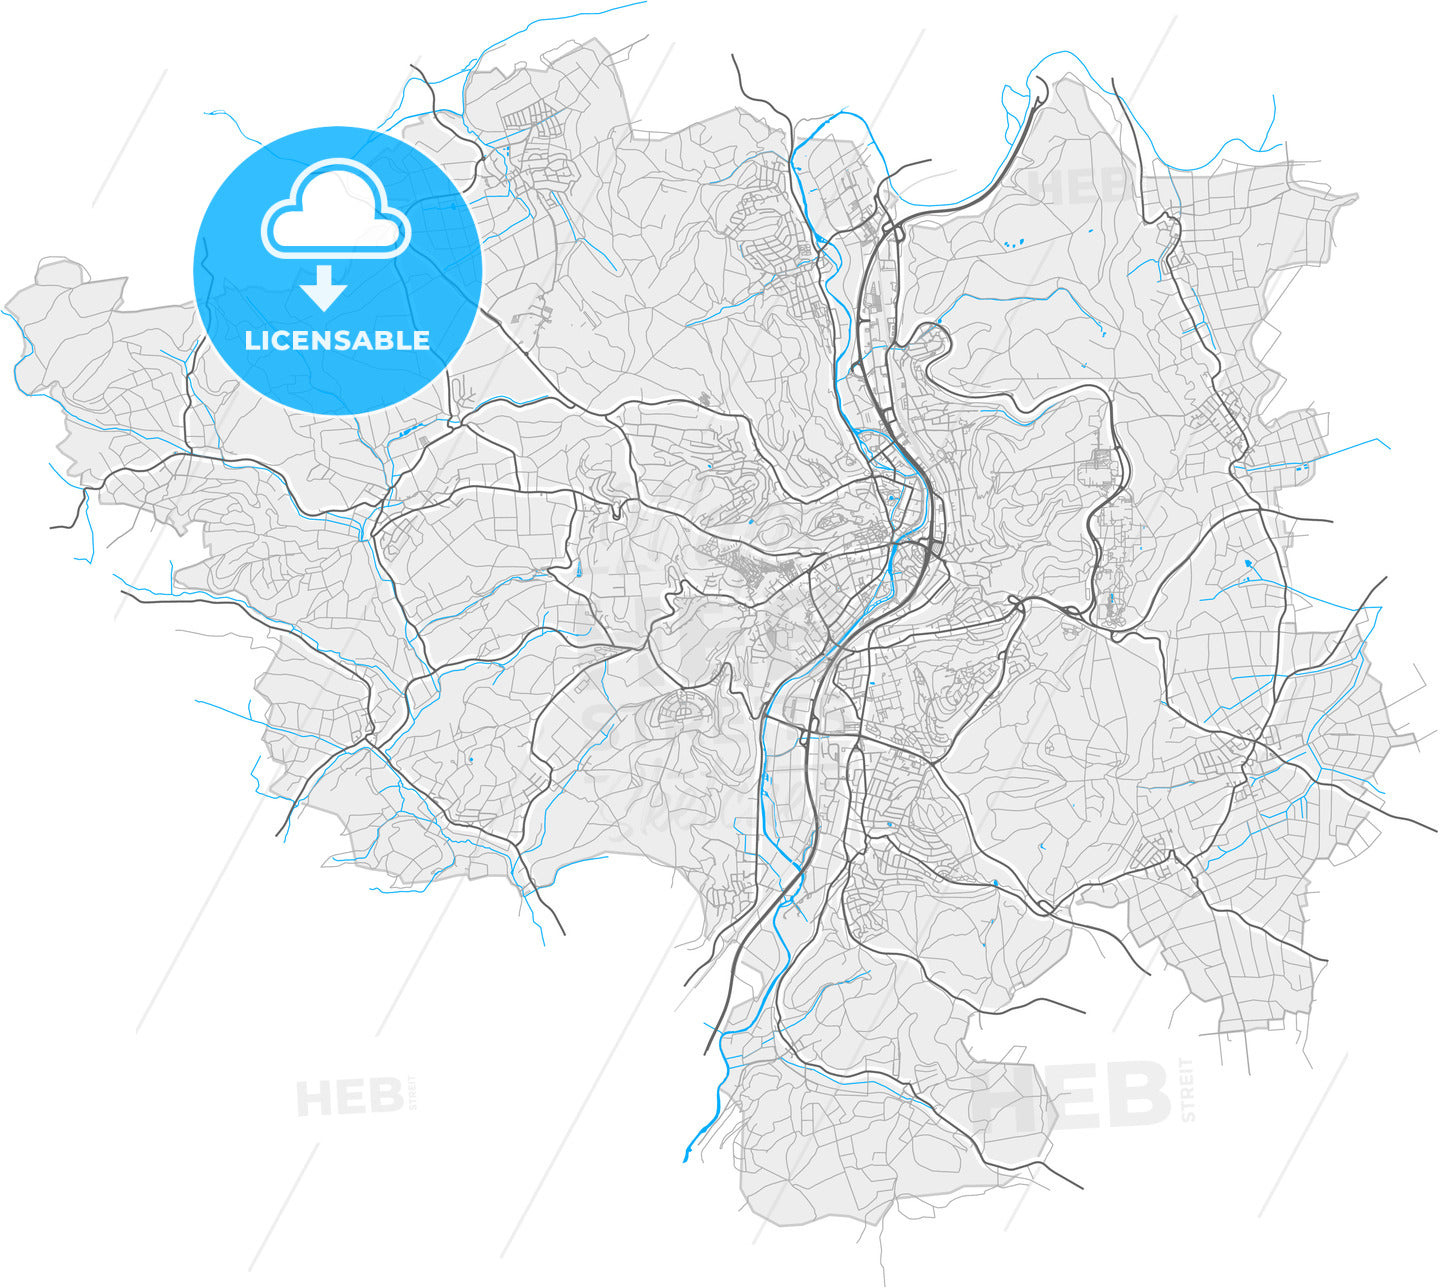 Marburg, Hesse, Germany, high quality vector map